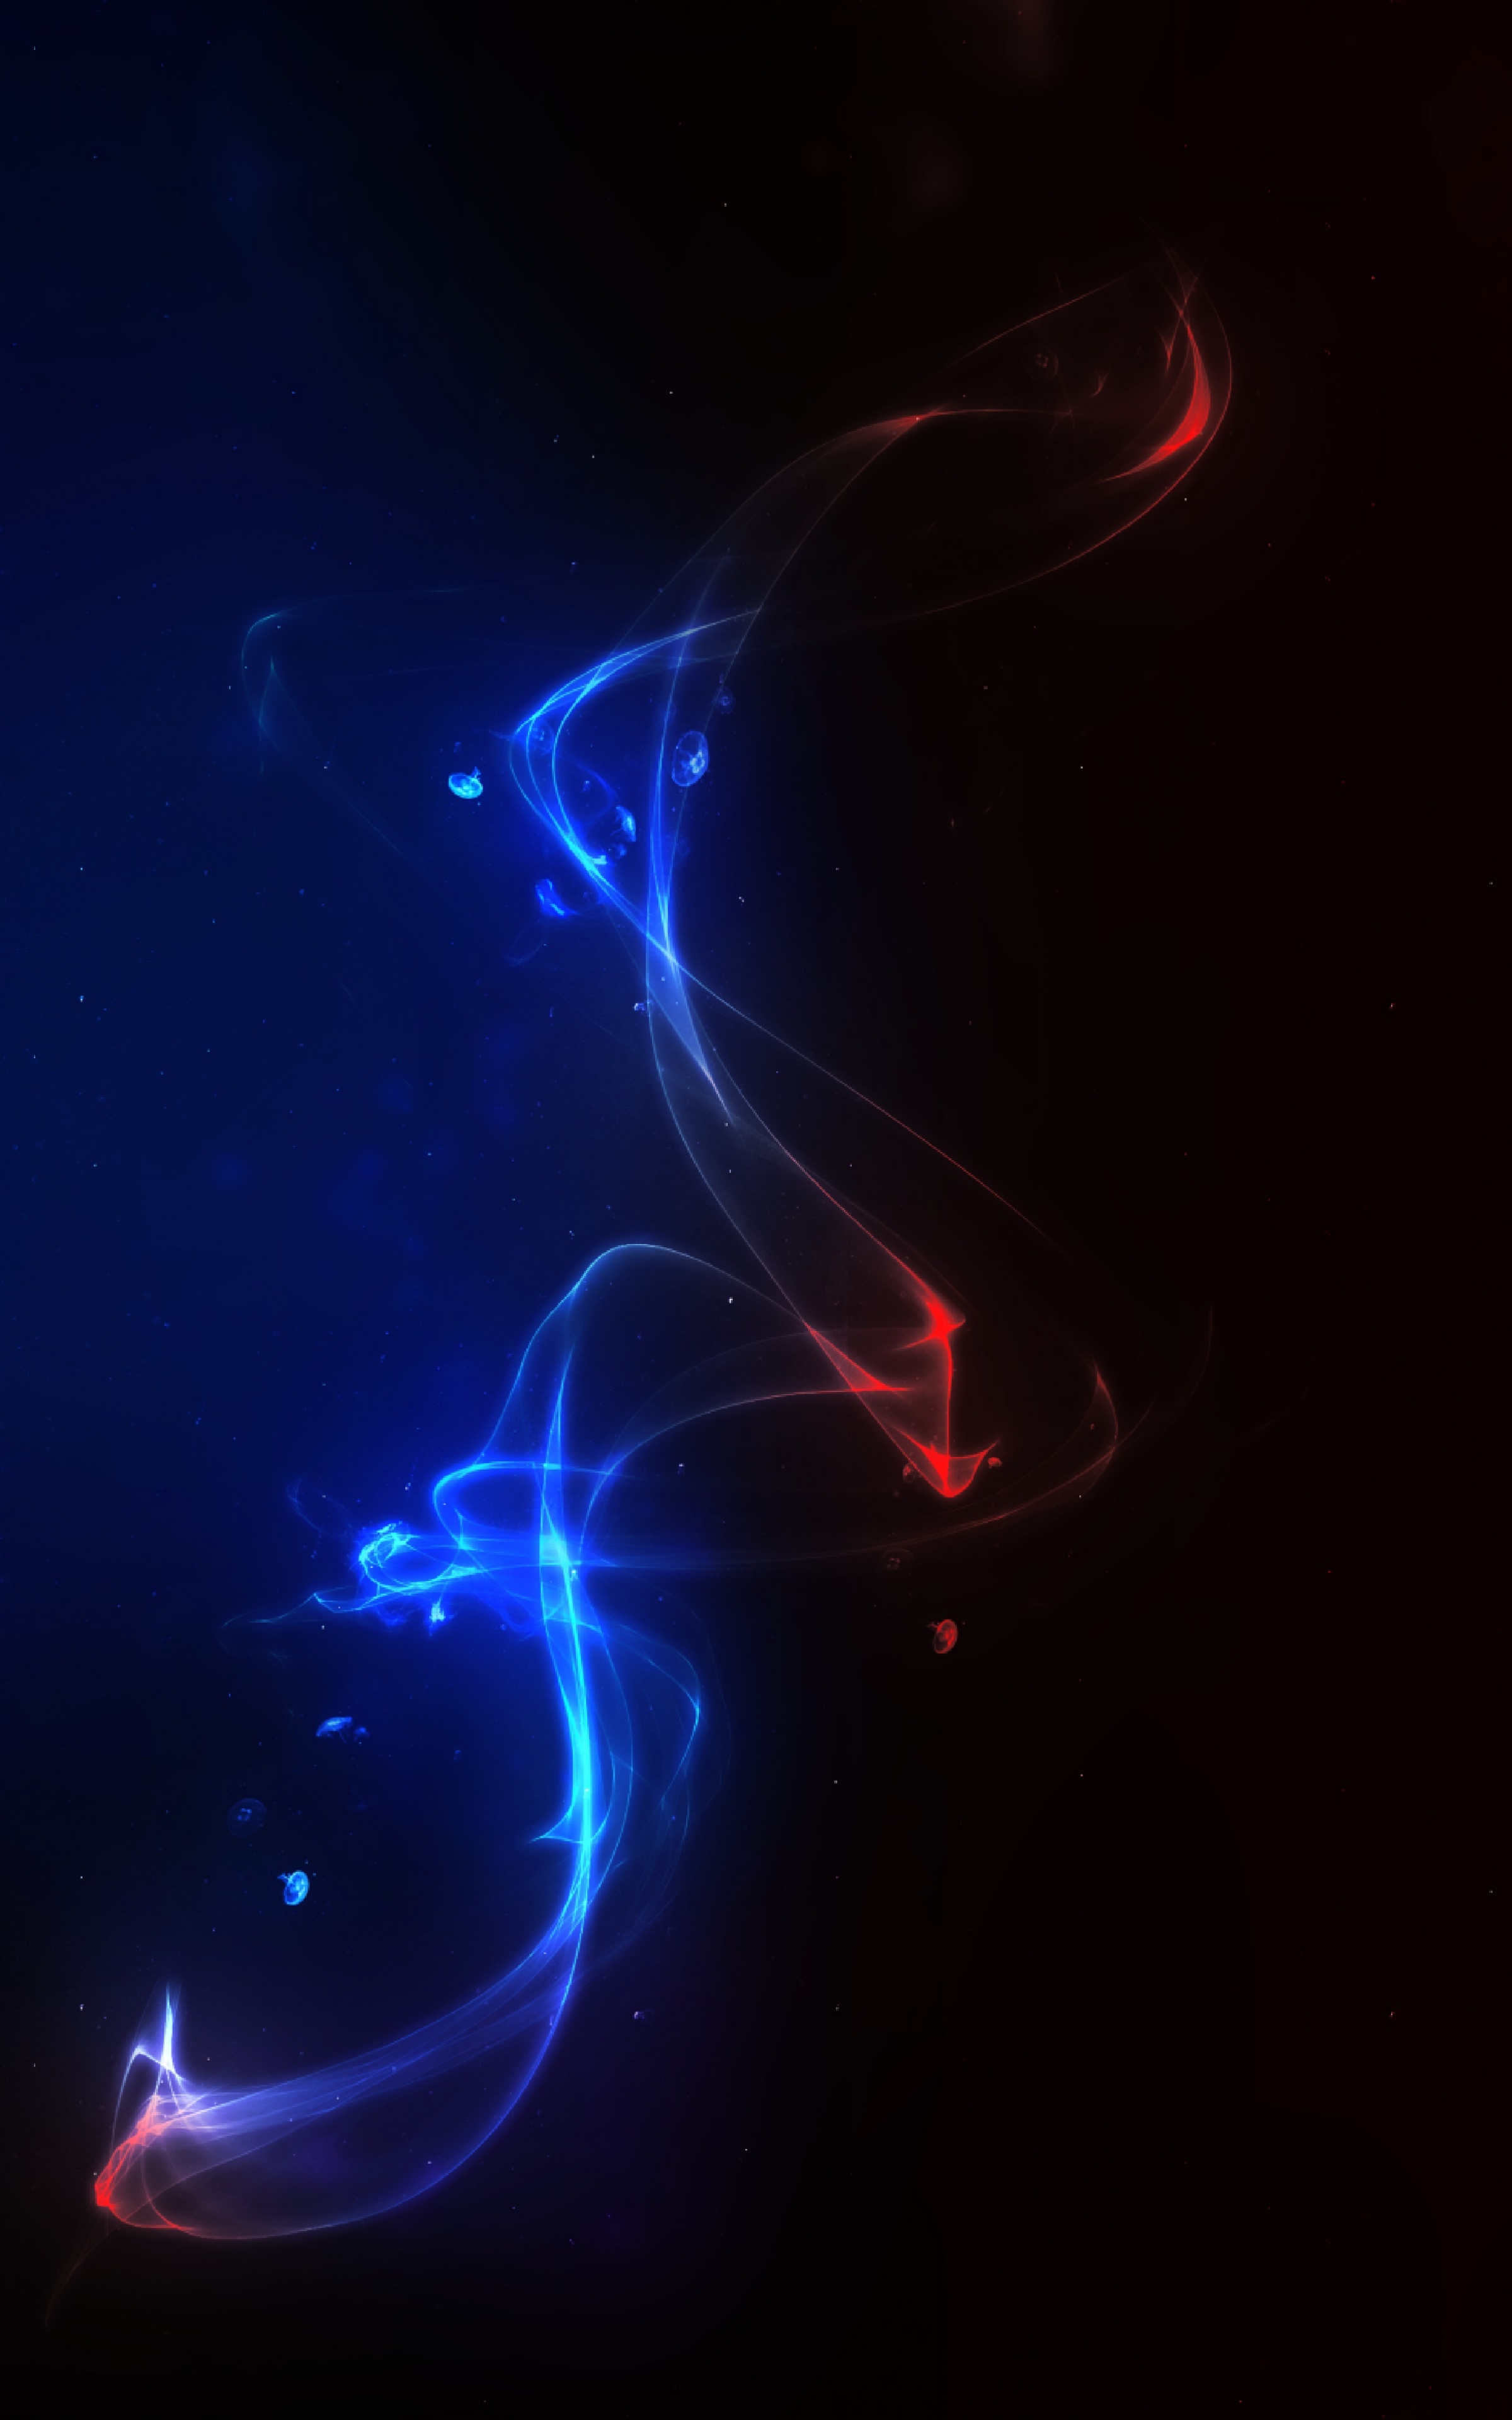 glow, energy, abstract, blue, red